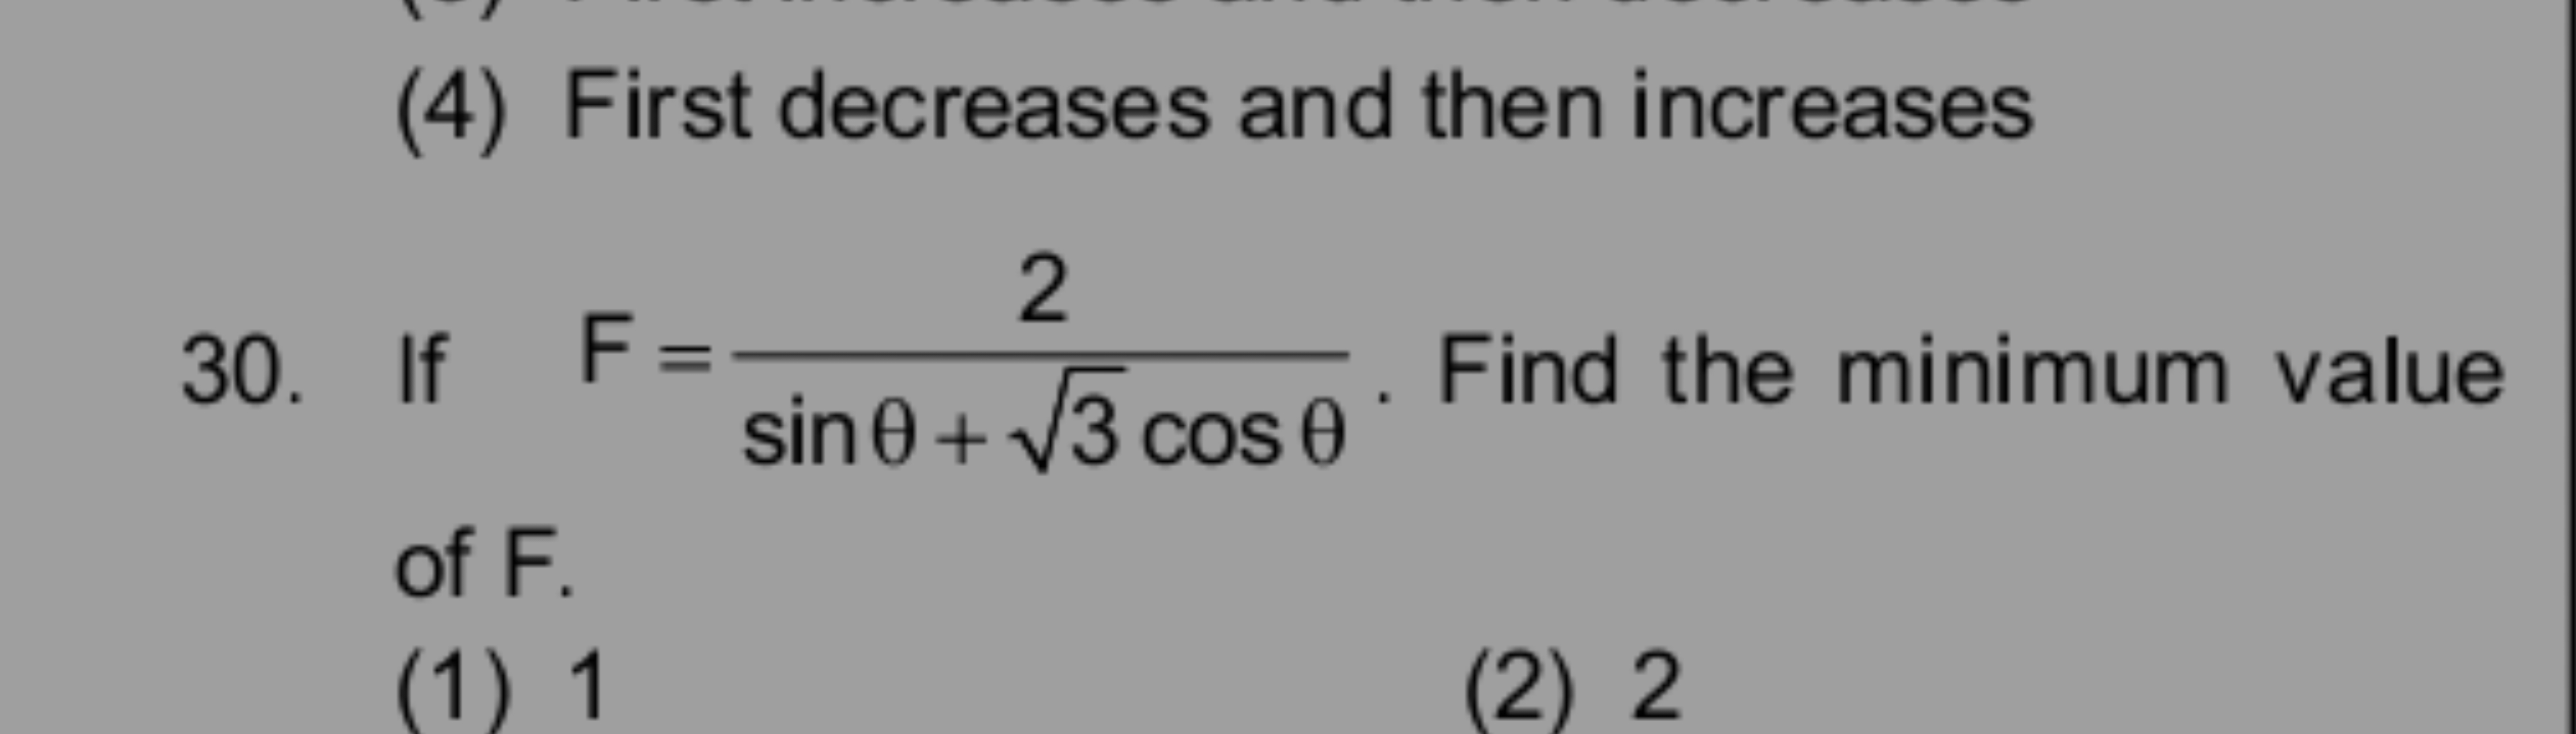 (4) First decreases and then increases
30. If F=sinθ+3​cosθ2​. Find th